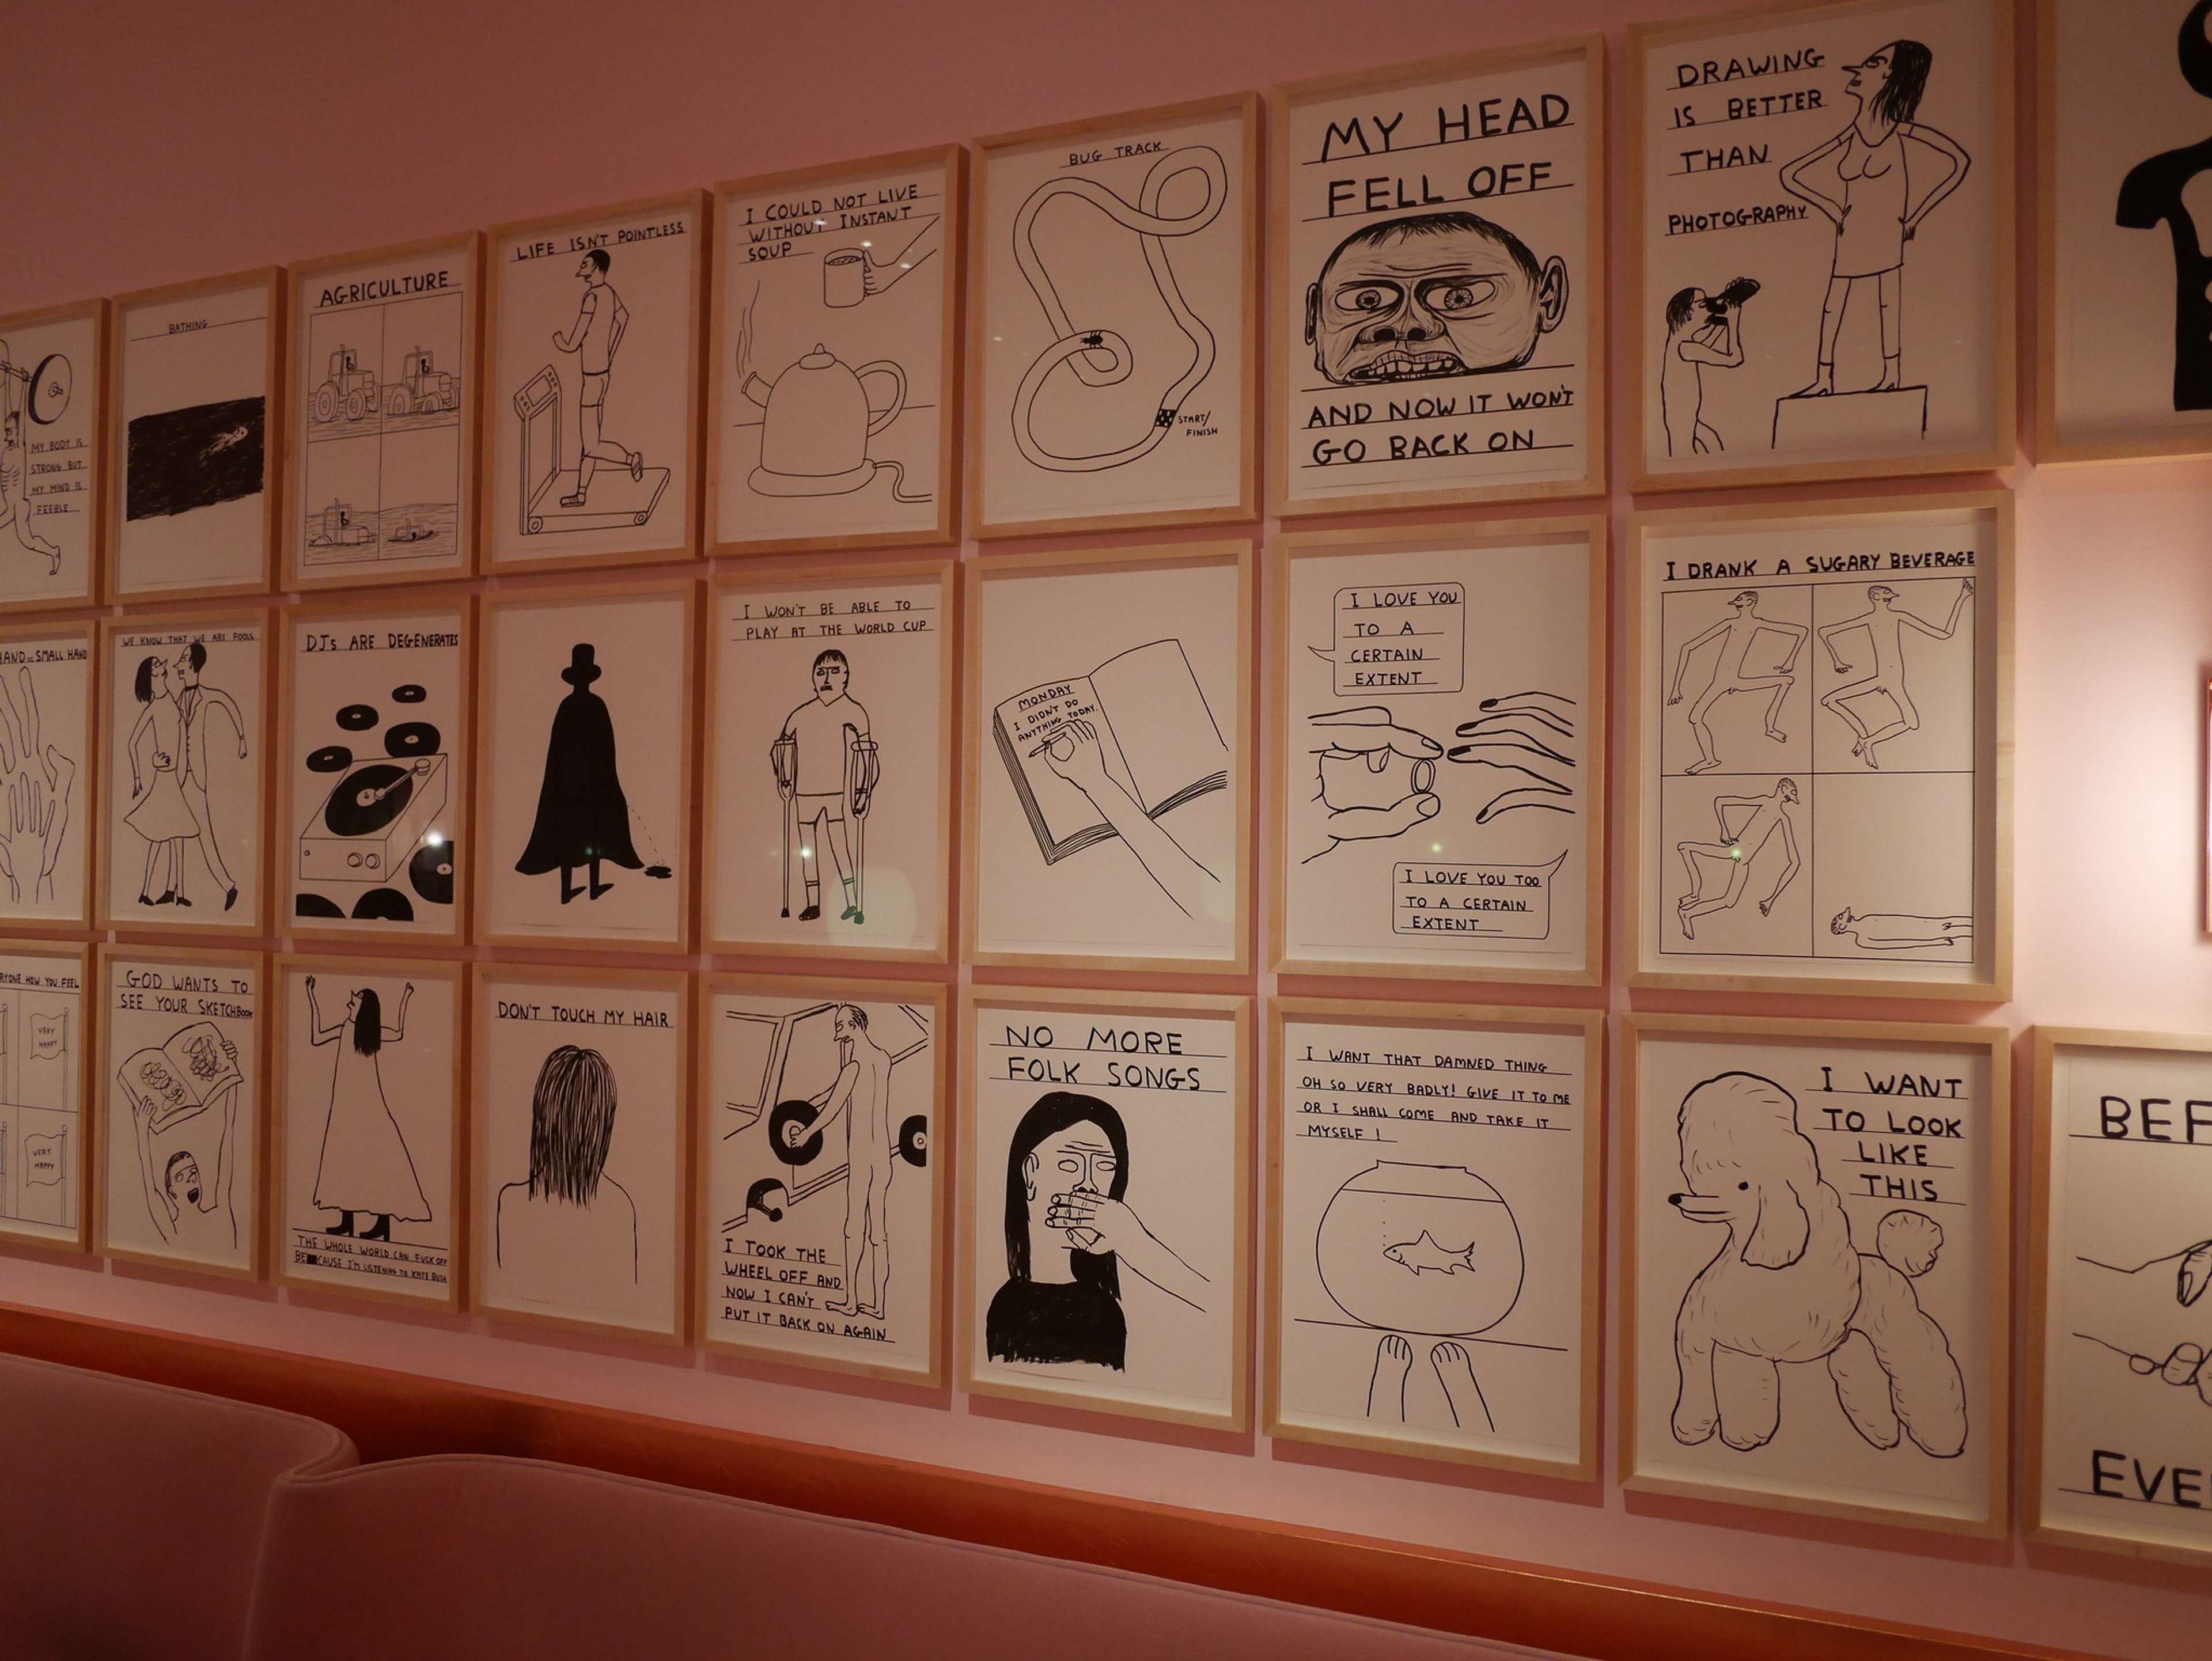 Dozens of prints by David Shrigley are seen hanging on a pink wall at the restaurant Sketch.